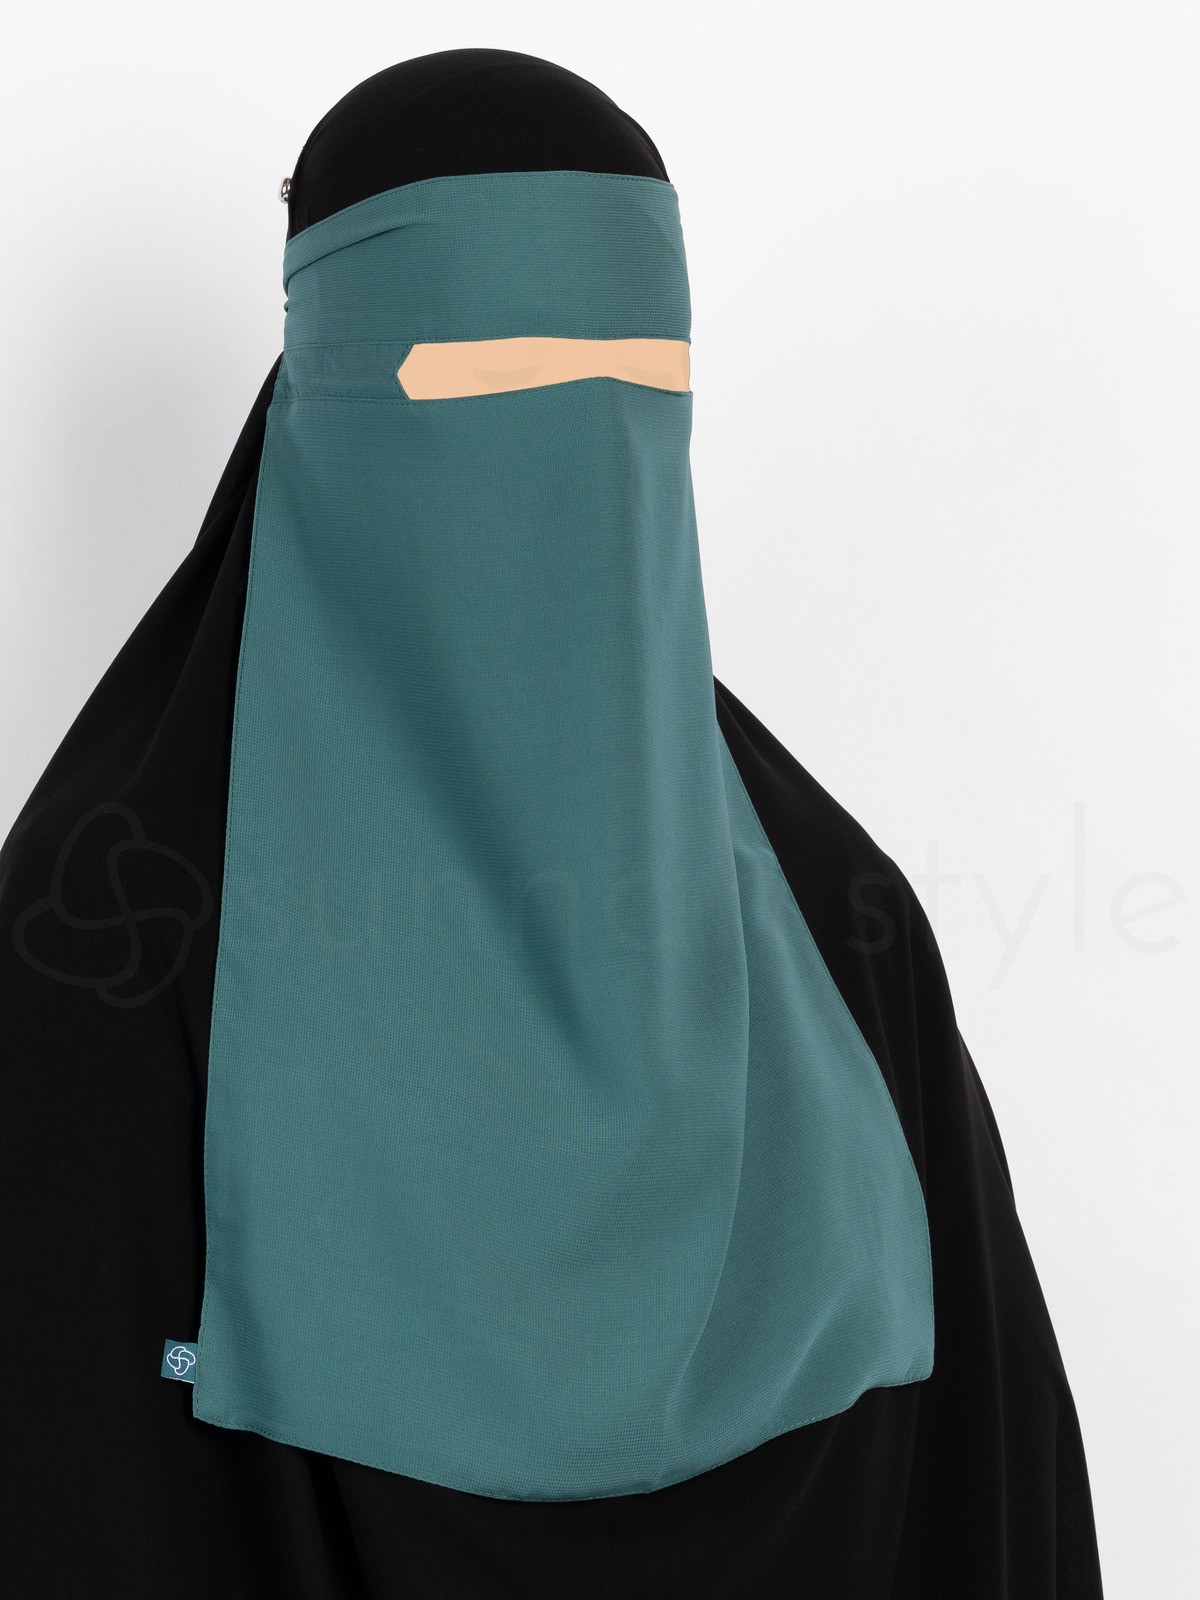 Sunnah Style - No-Pinch One Layer Niqab (Teal)